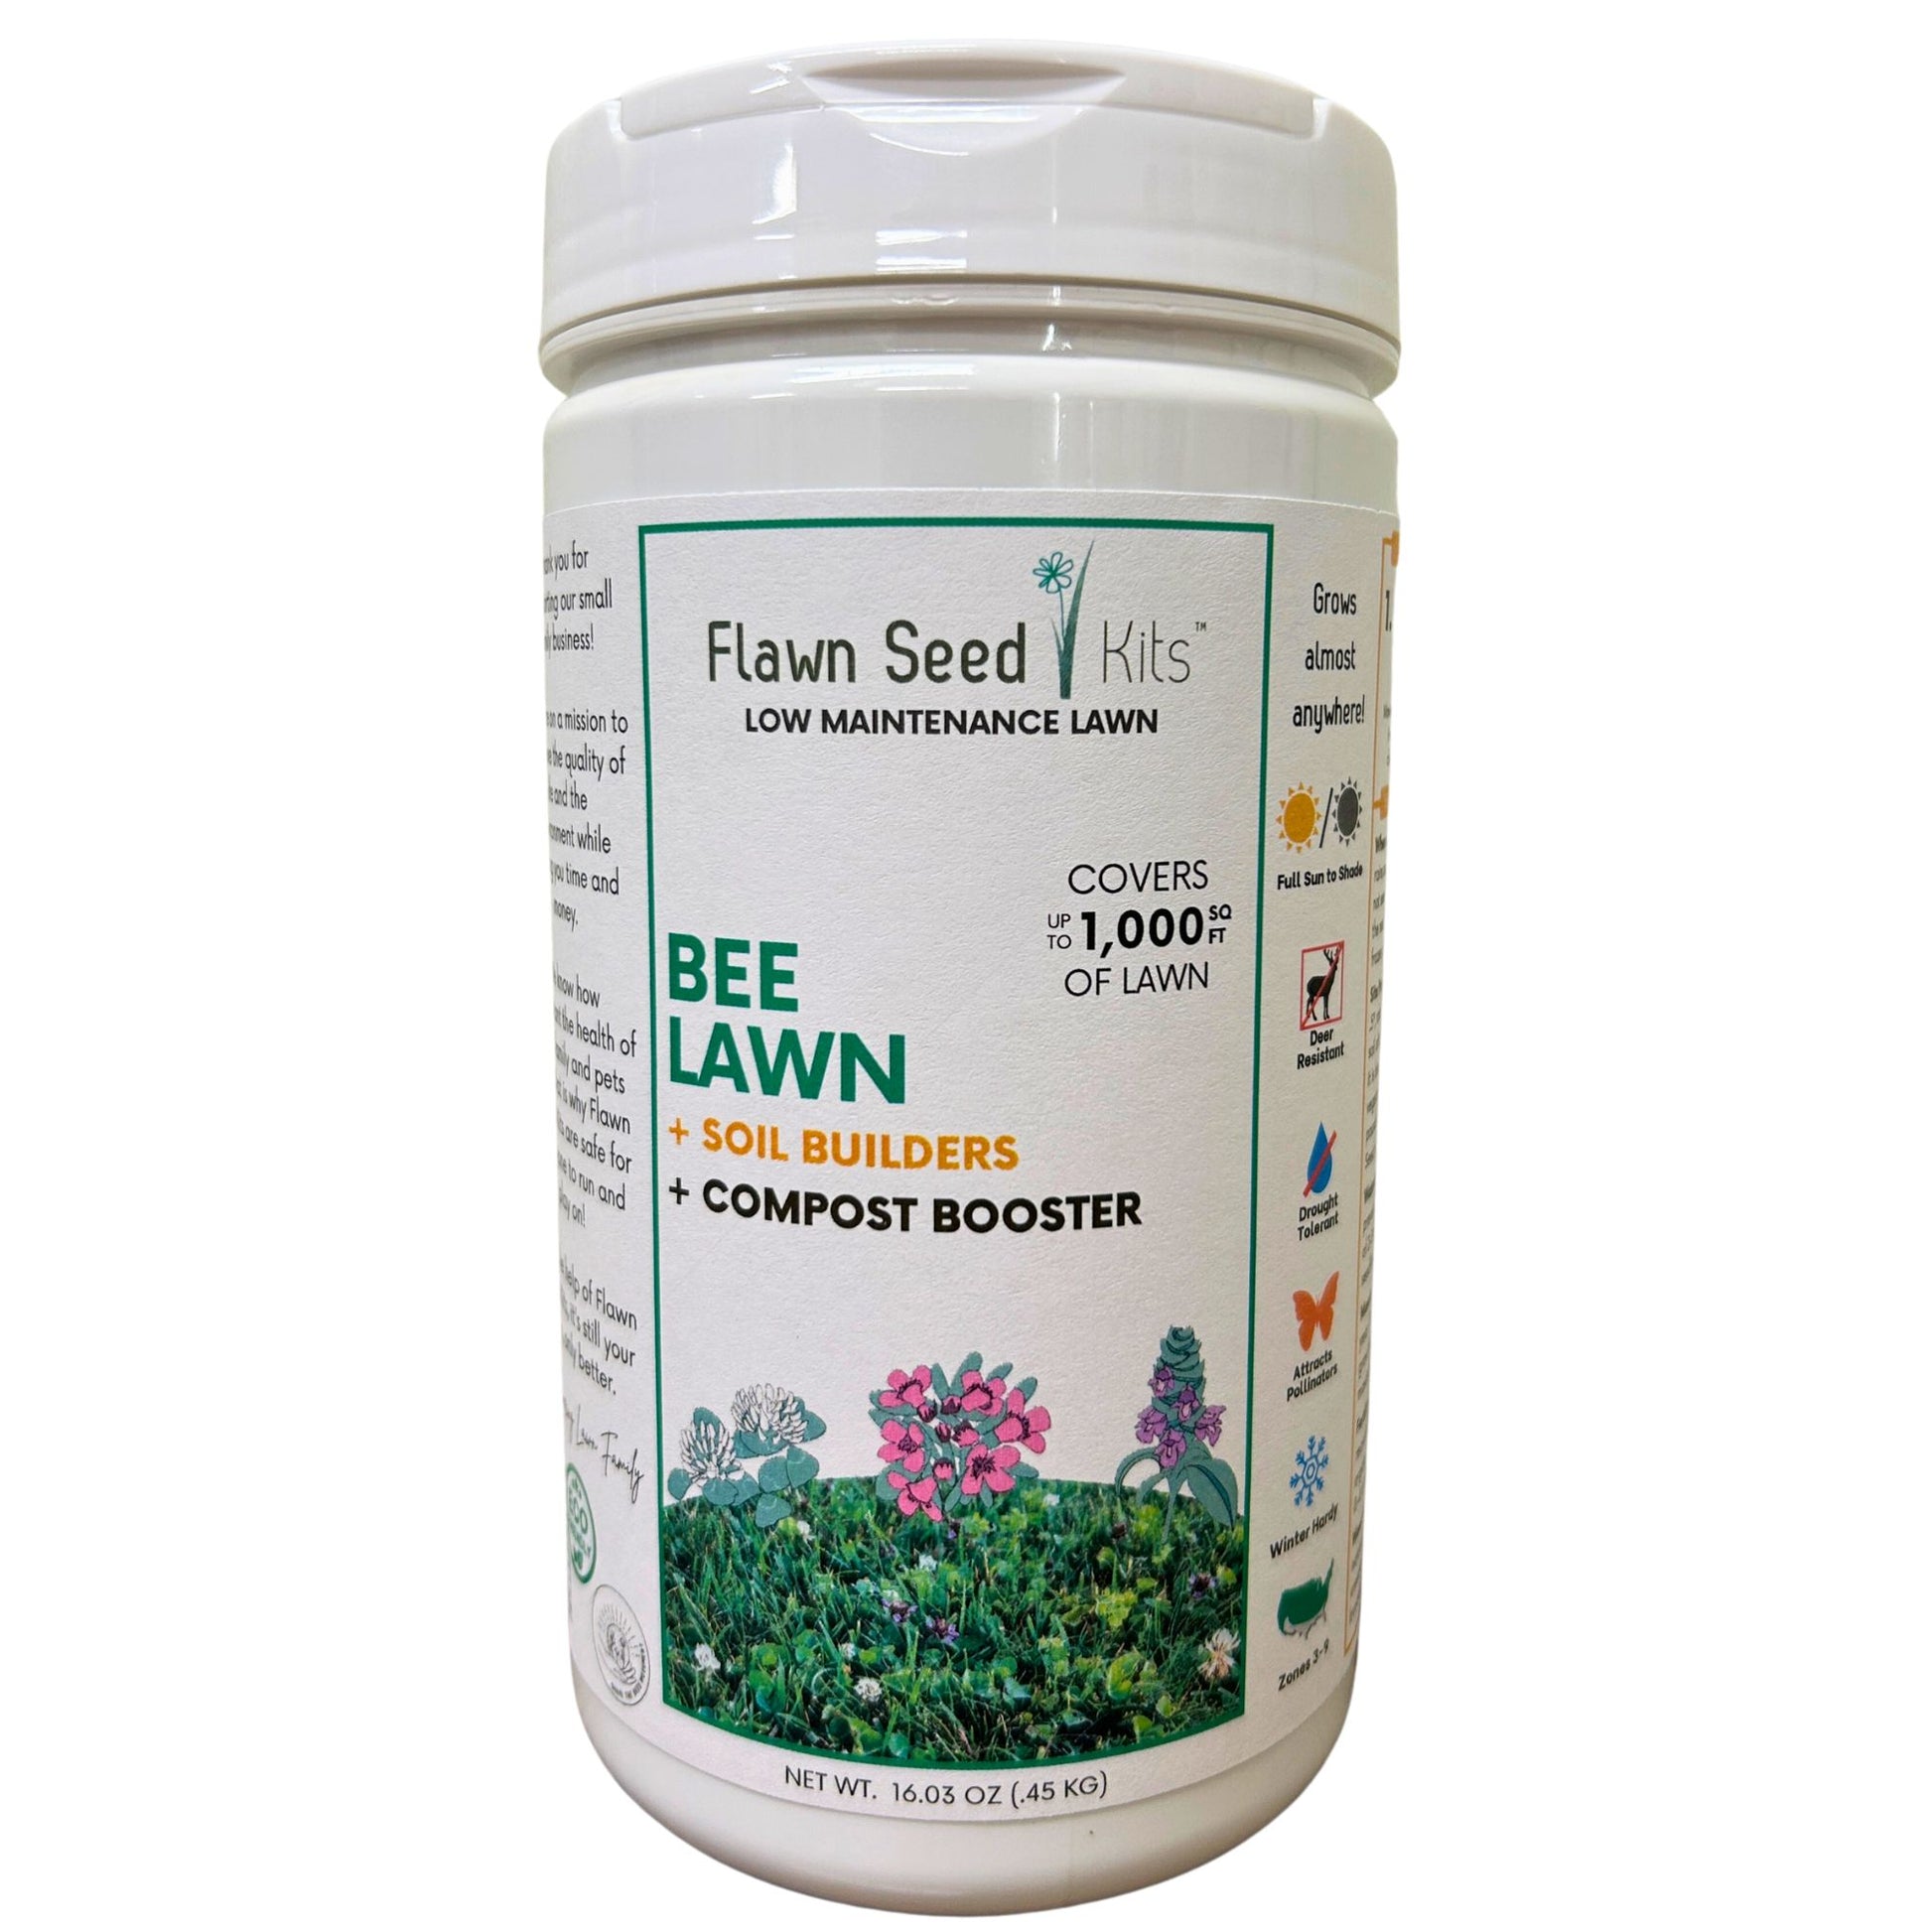 Bee Lawn Flowering Pollinator Seed Kit, Dutch White Clover, Self-Heal, Creeping Thyme, Easy Spread Container